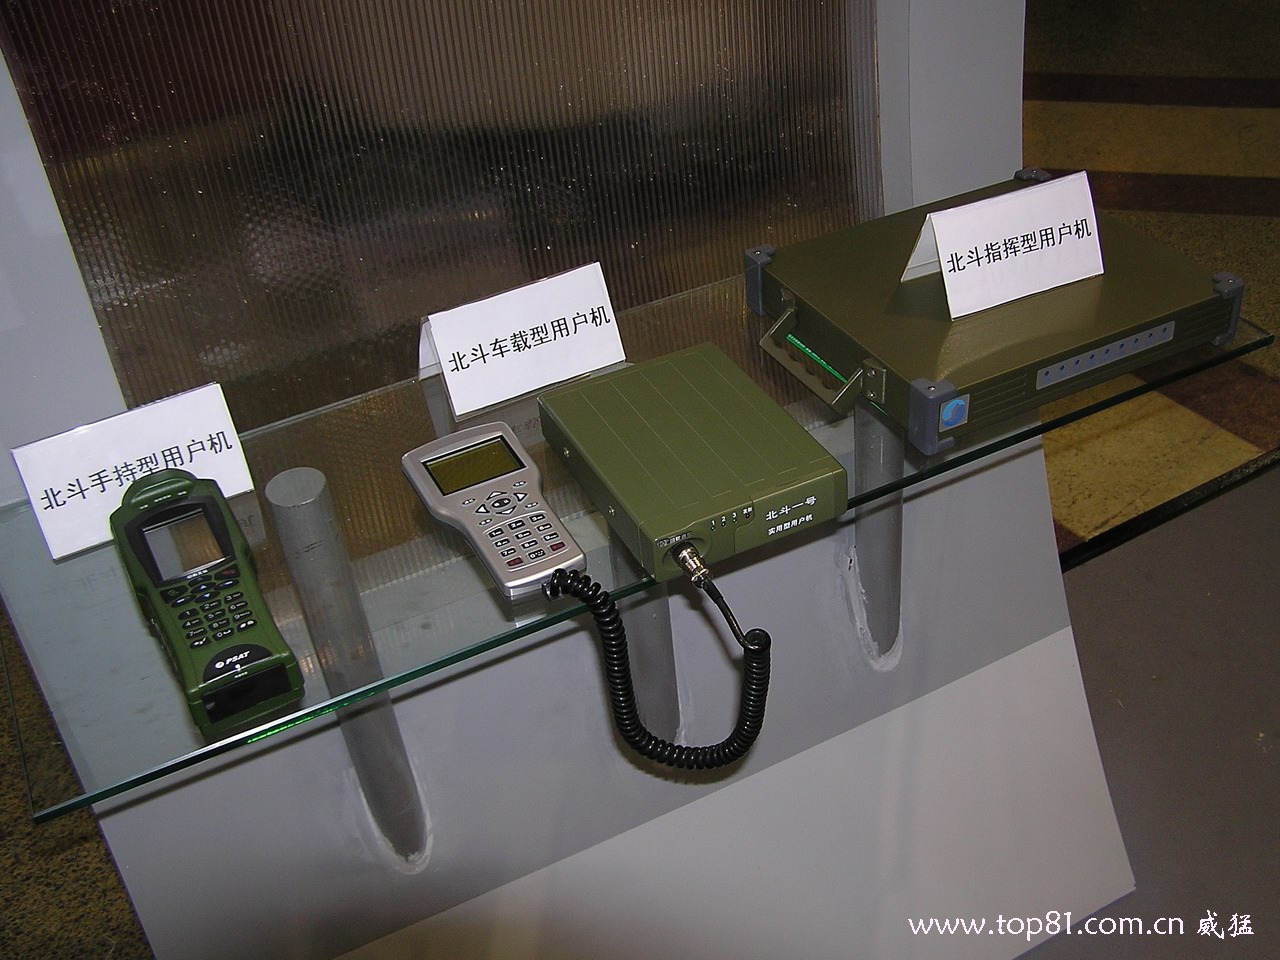 chinese GPS receiver. They use chinese "bei dou" satellite.